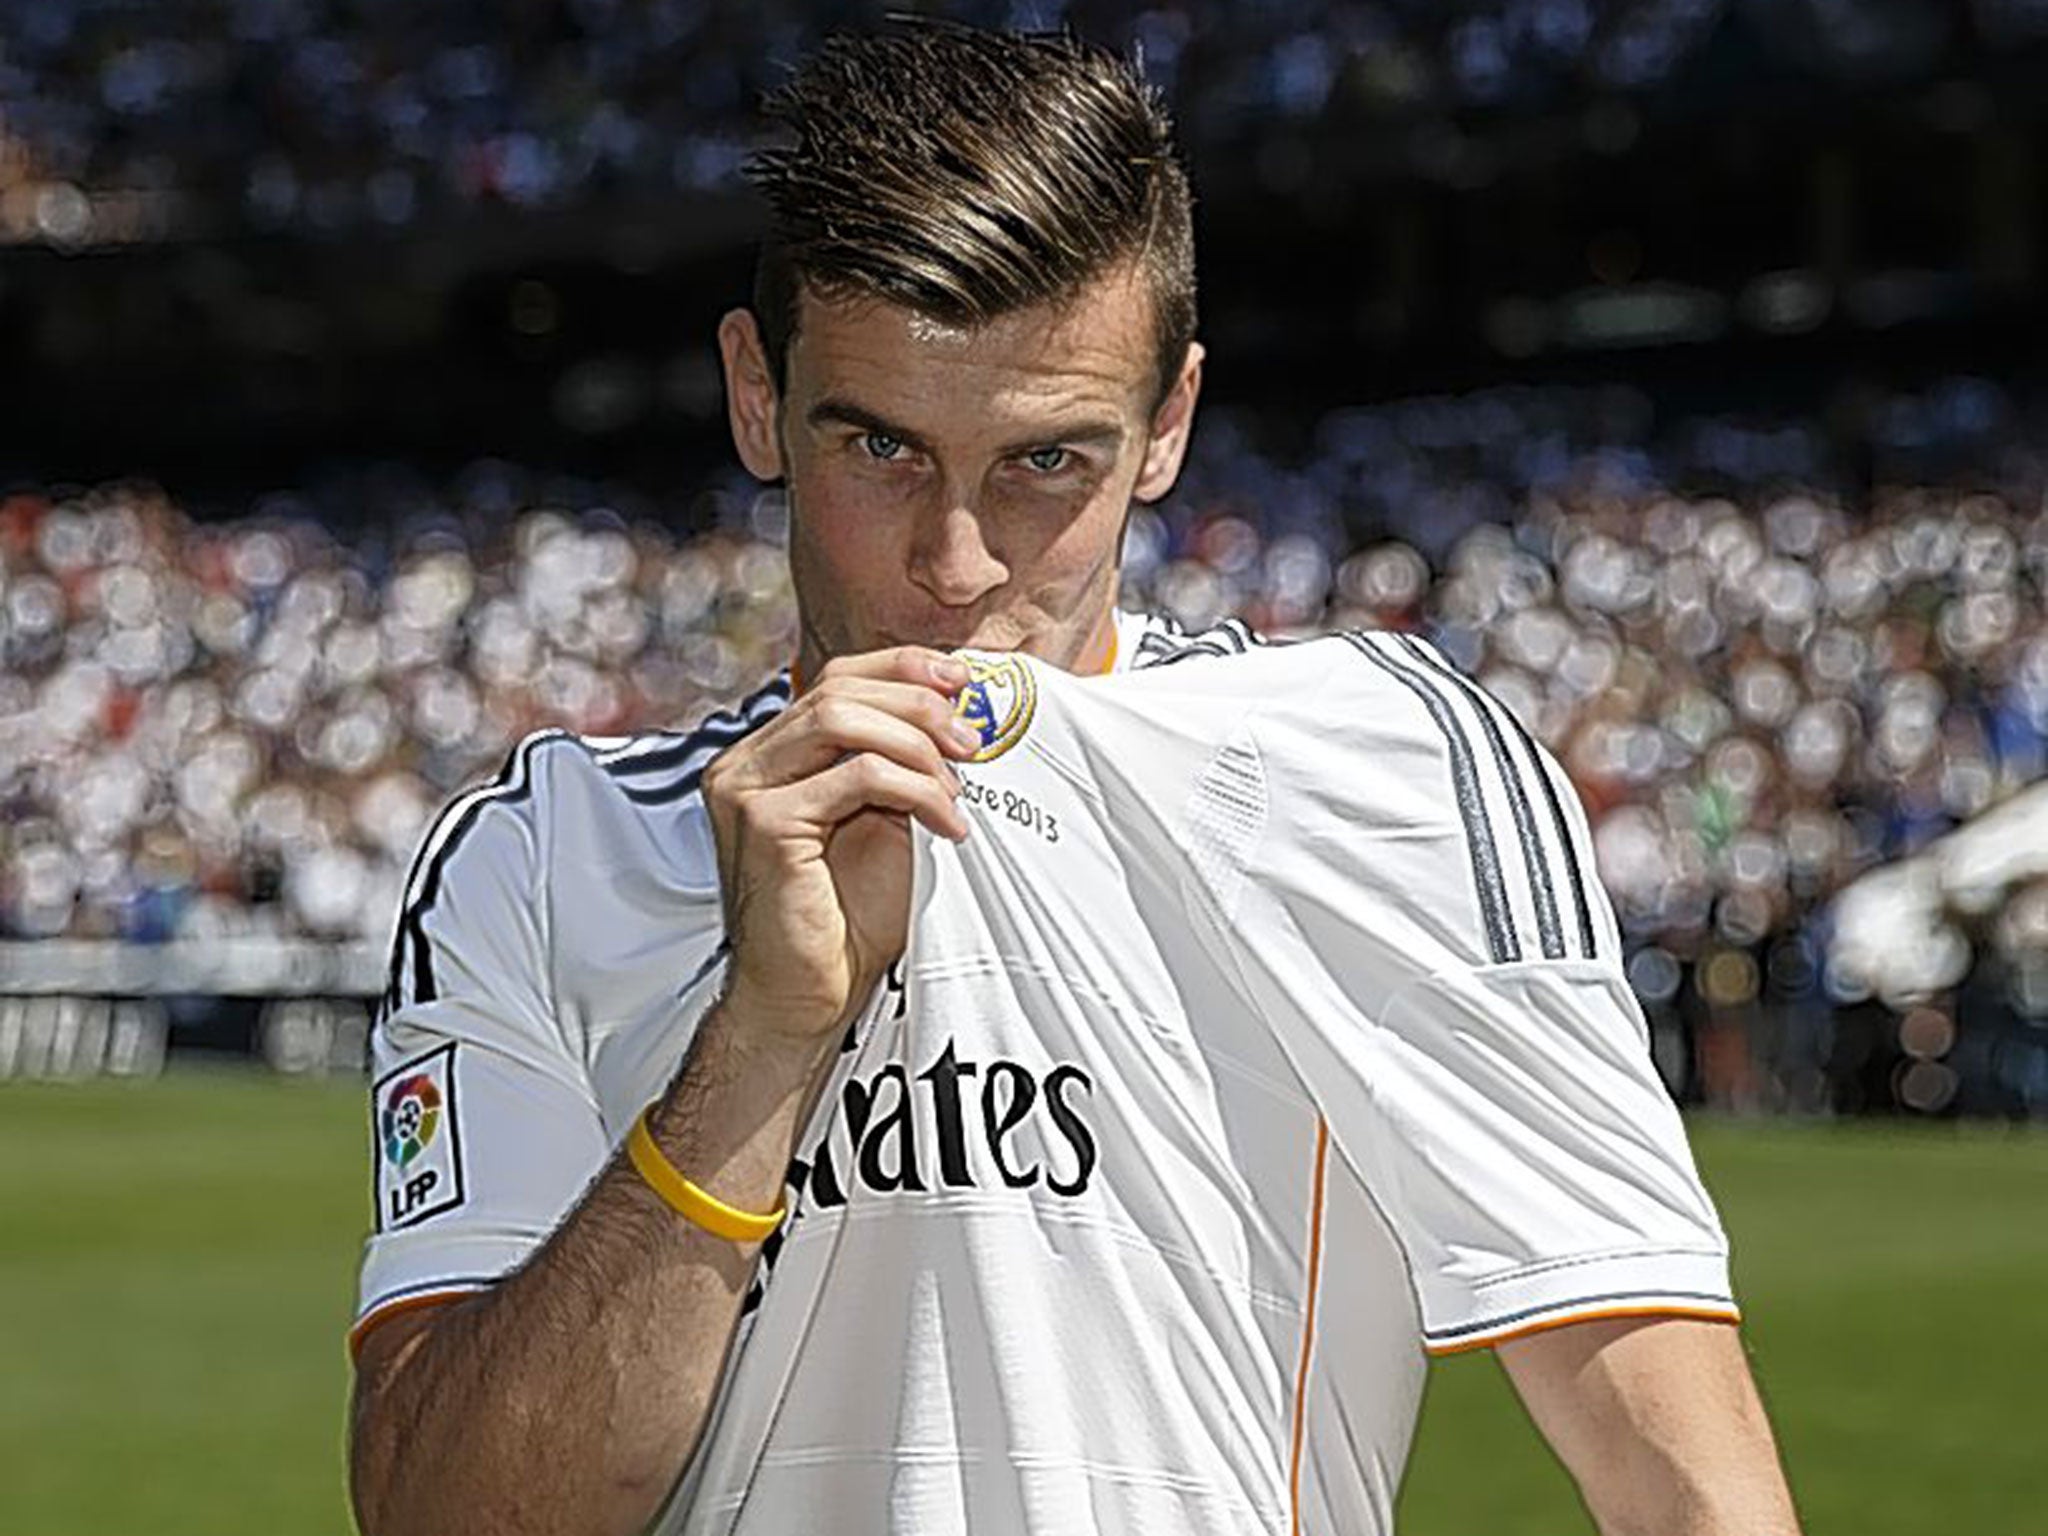 Kissing goodbye: The bogus act of affinity which is badge kissing, demonstrated here by Gareth Bale, should be a yellow-card offence